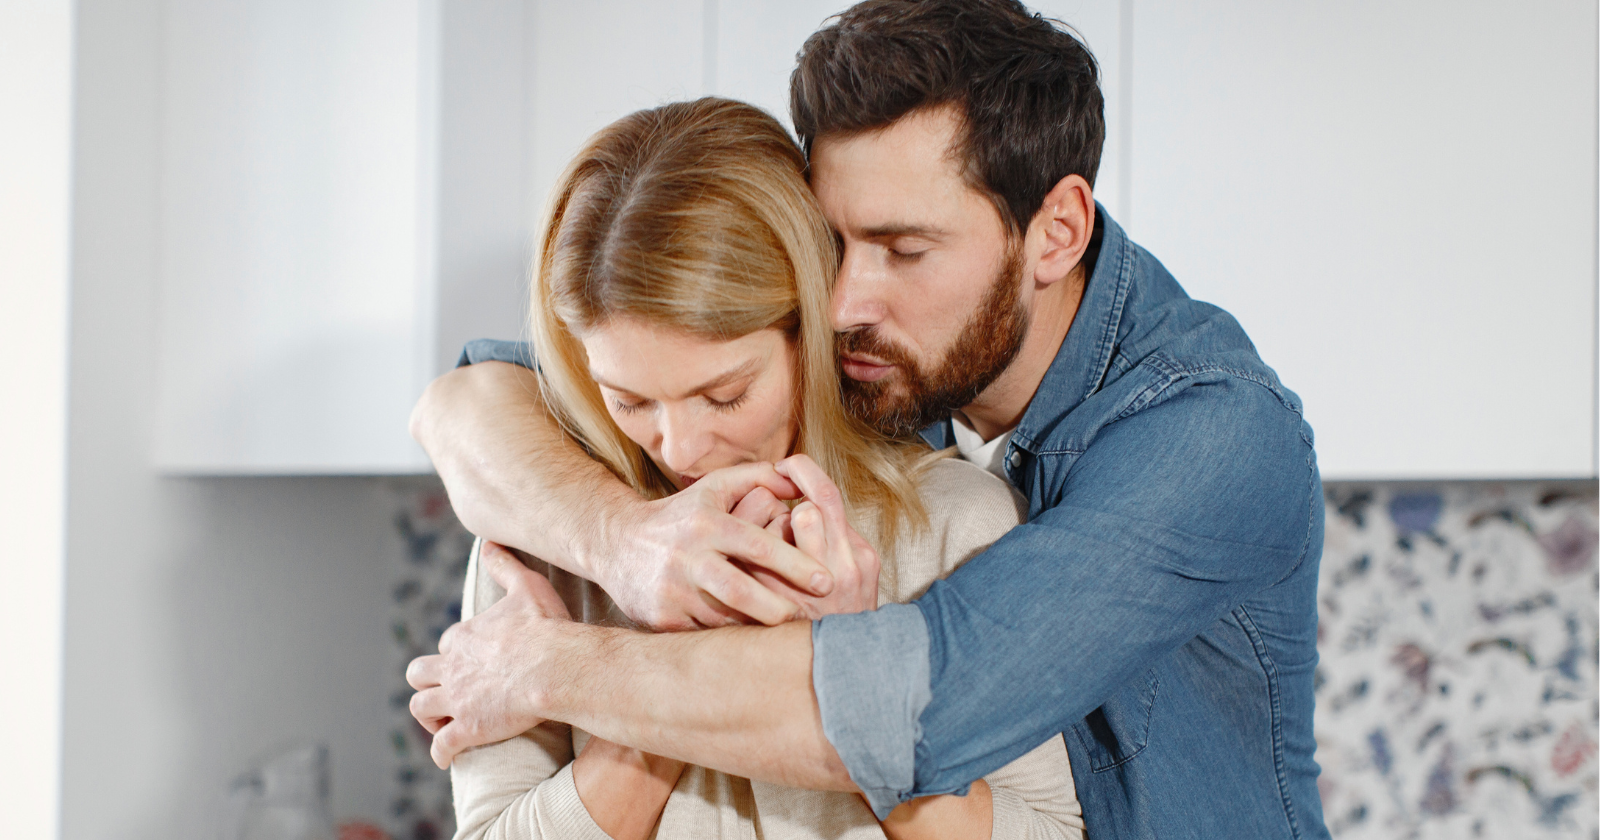 7 subtle signs you’re enabling codependency in your relationship without realizing it [Video]